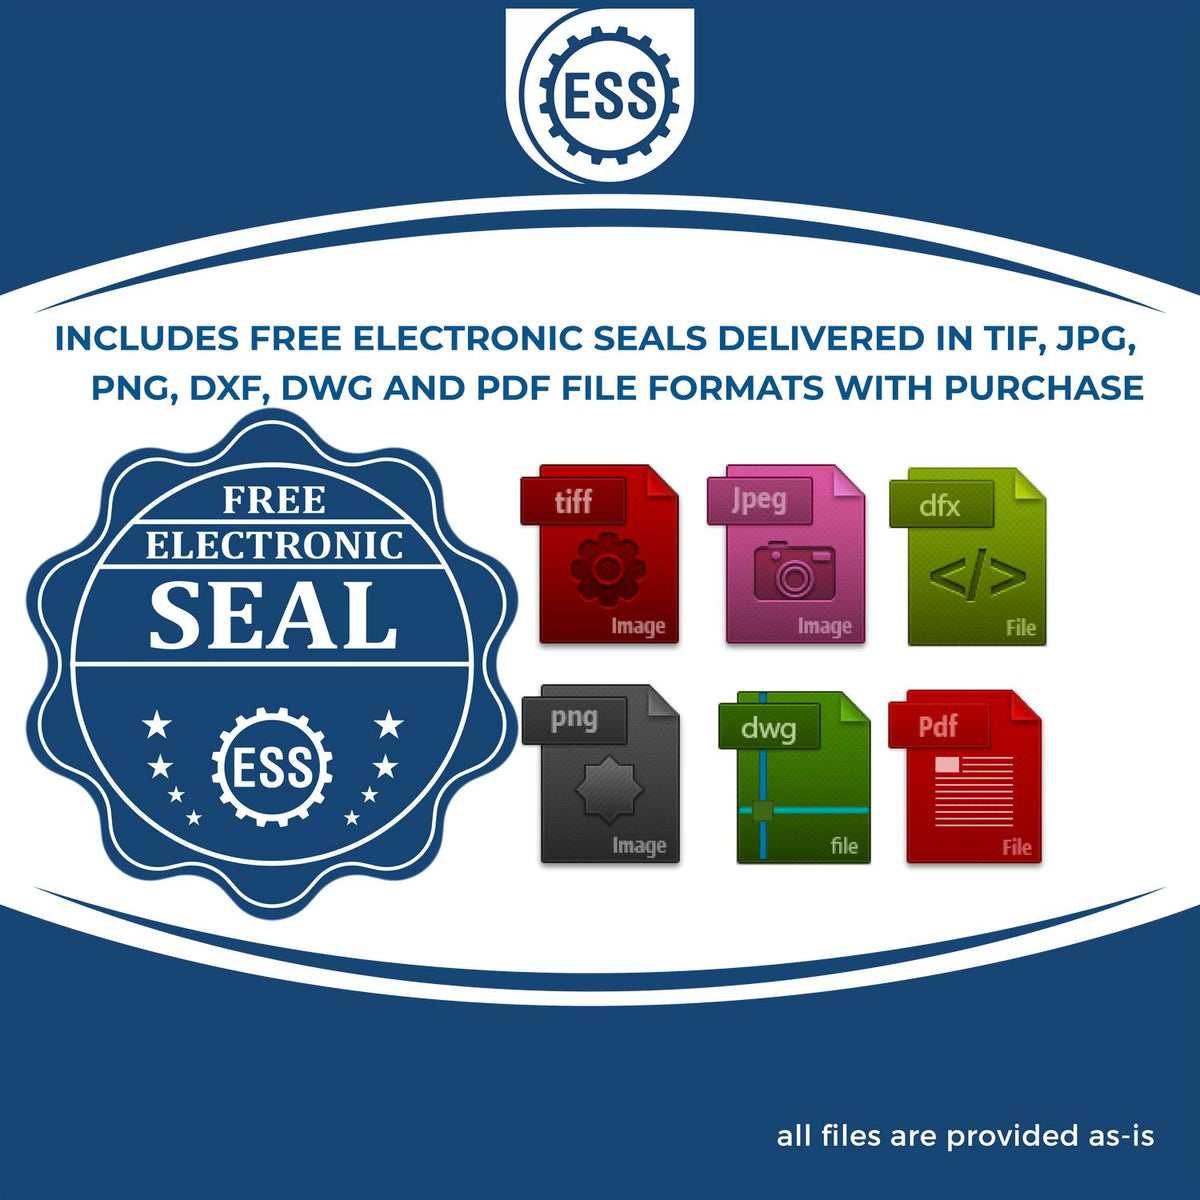 An infographic for the free electronic seal for the Heavy Duty Cast Iron Michigan Engineer Seal Embosser illustrating the different file type icons such as DXF, DWG, TIF, JPG and PNG.